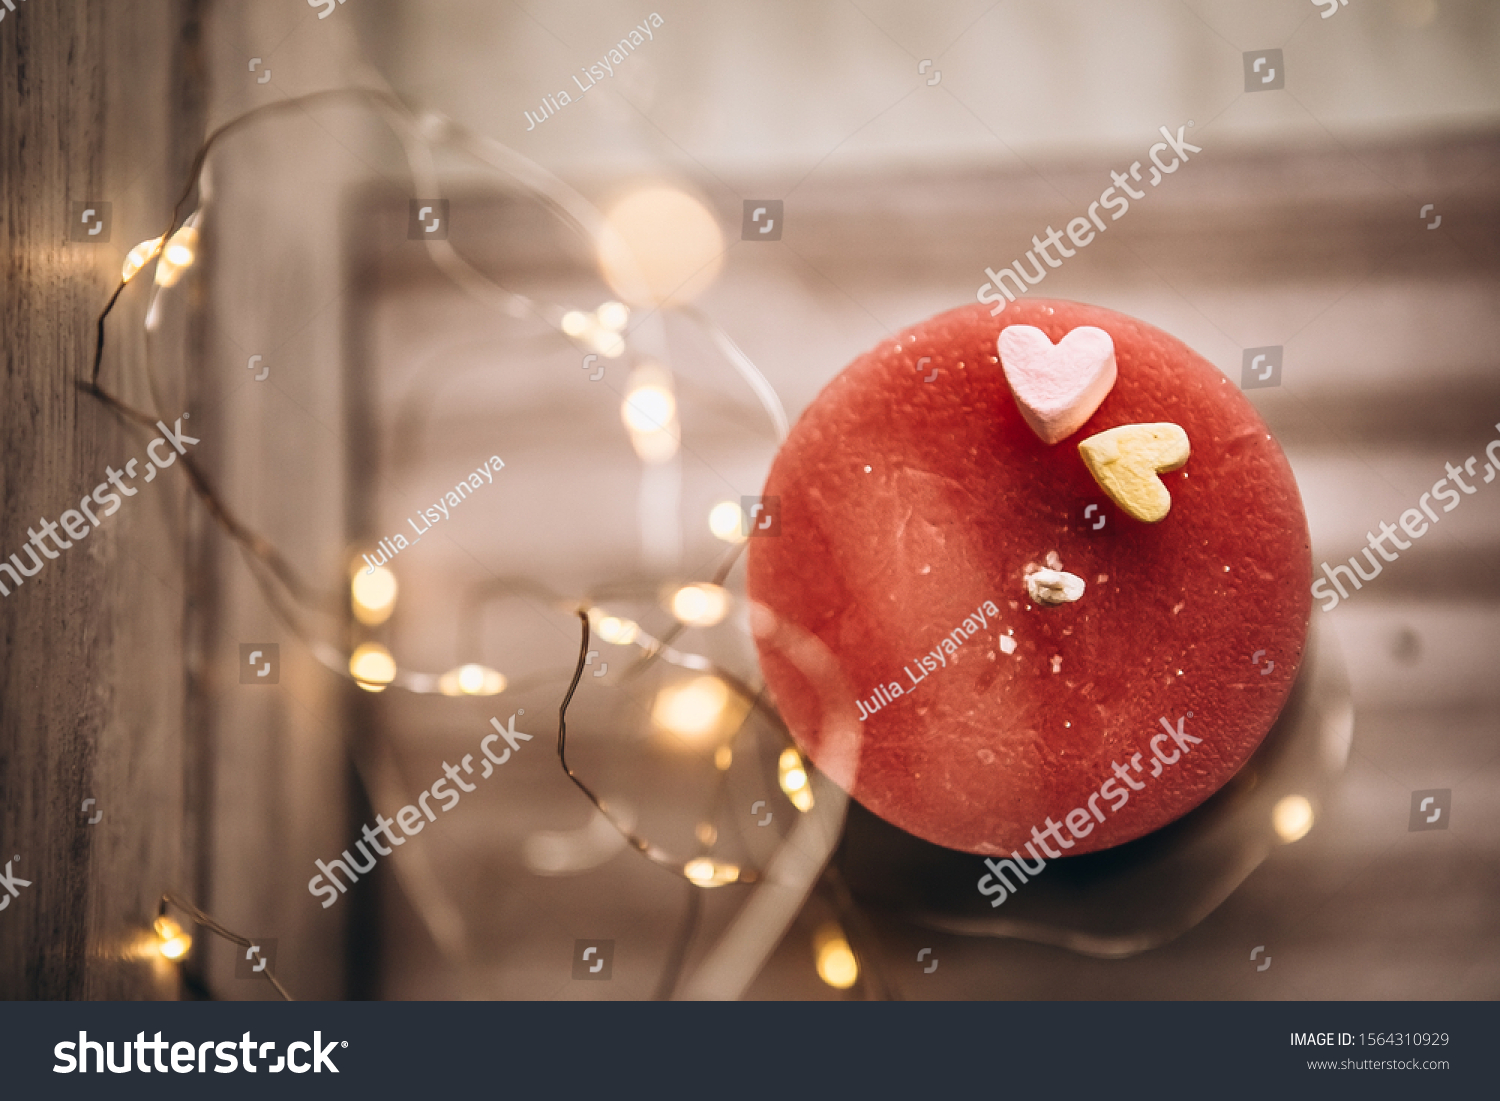 Romantic candle on a bokeh background. On top of the candle are two marshmallow hearts. New Year decorations and decorations #1564310929